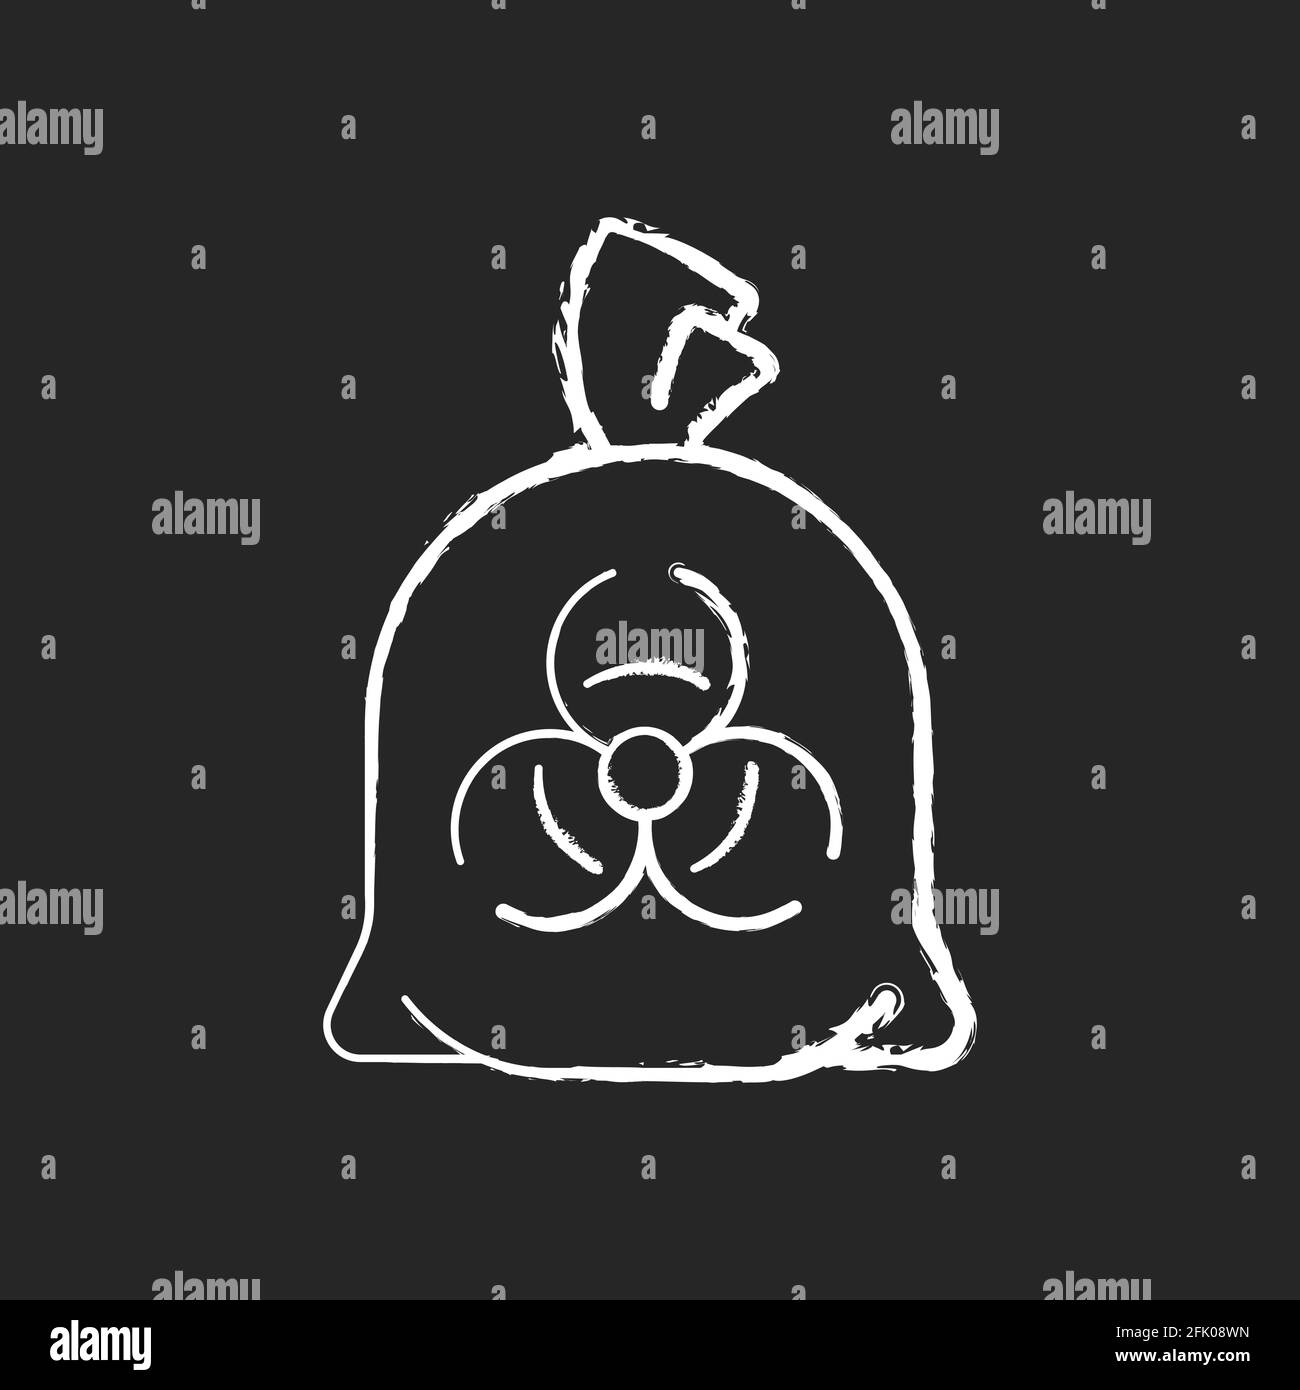 Infectious waste bag chalk white icon on black background Stock Vector